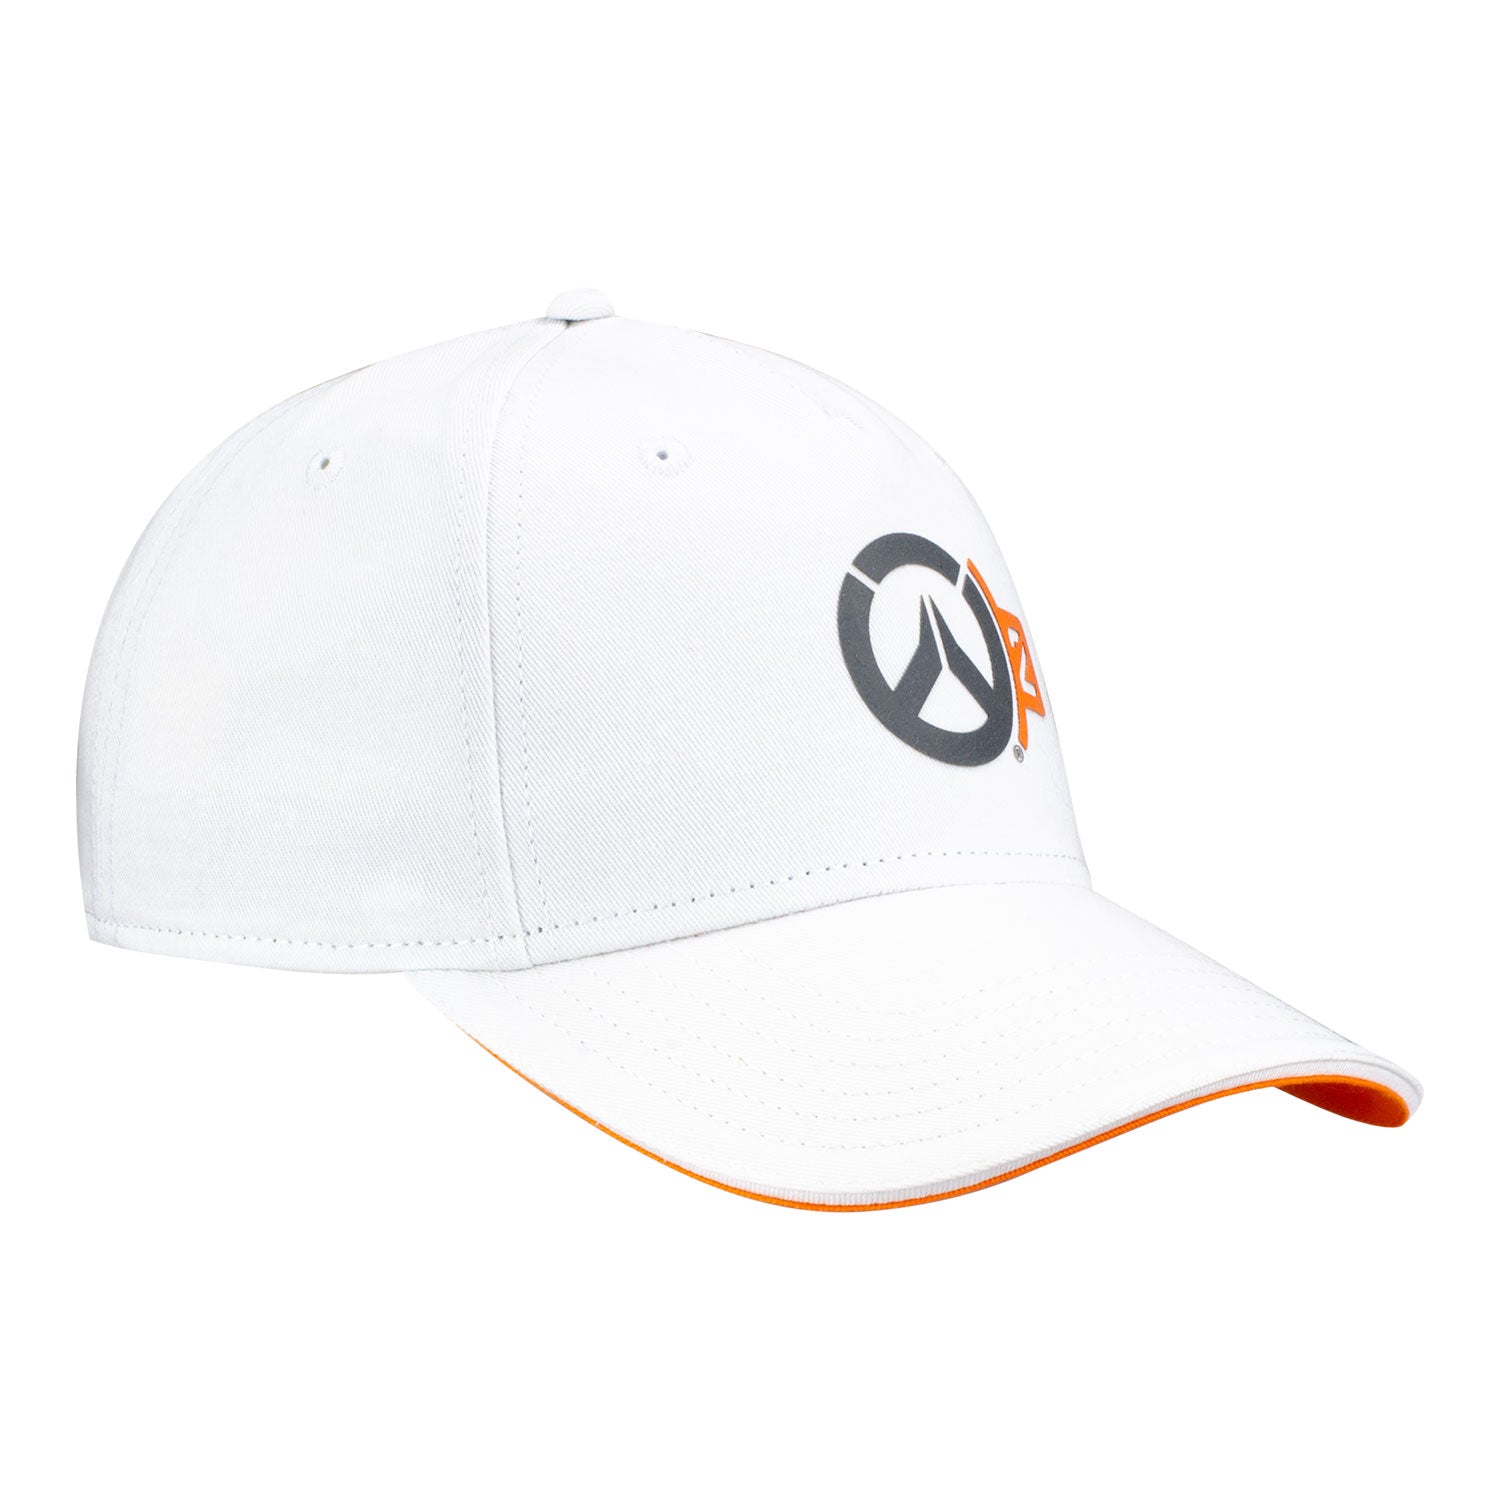 Overwatch 2 Tracer Adjustable Hat - Front Right Side View